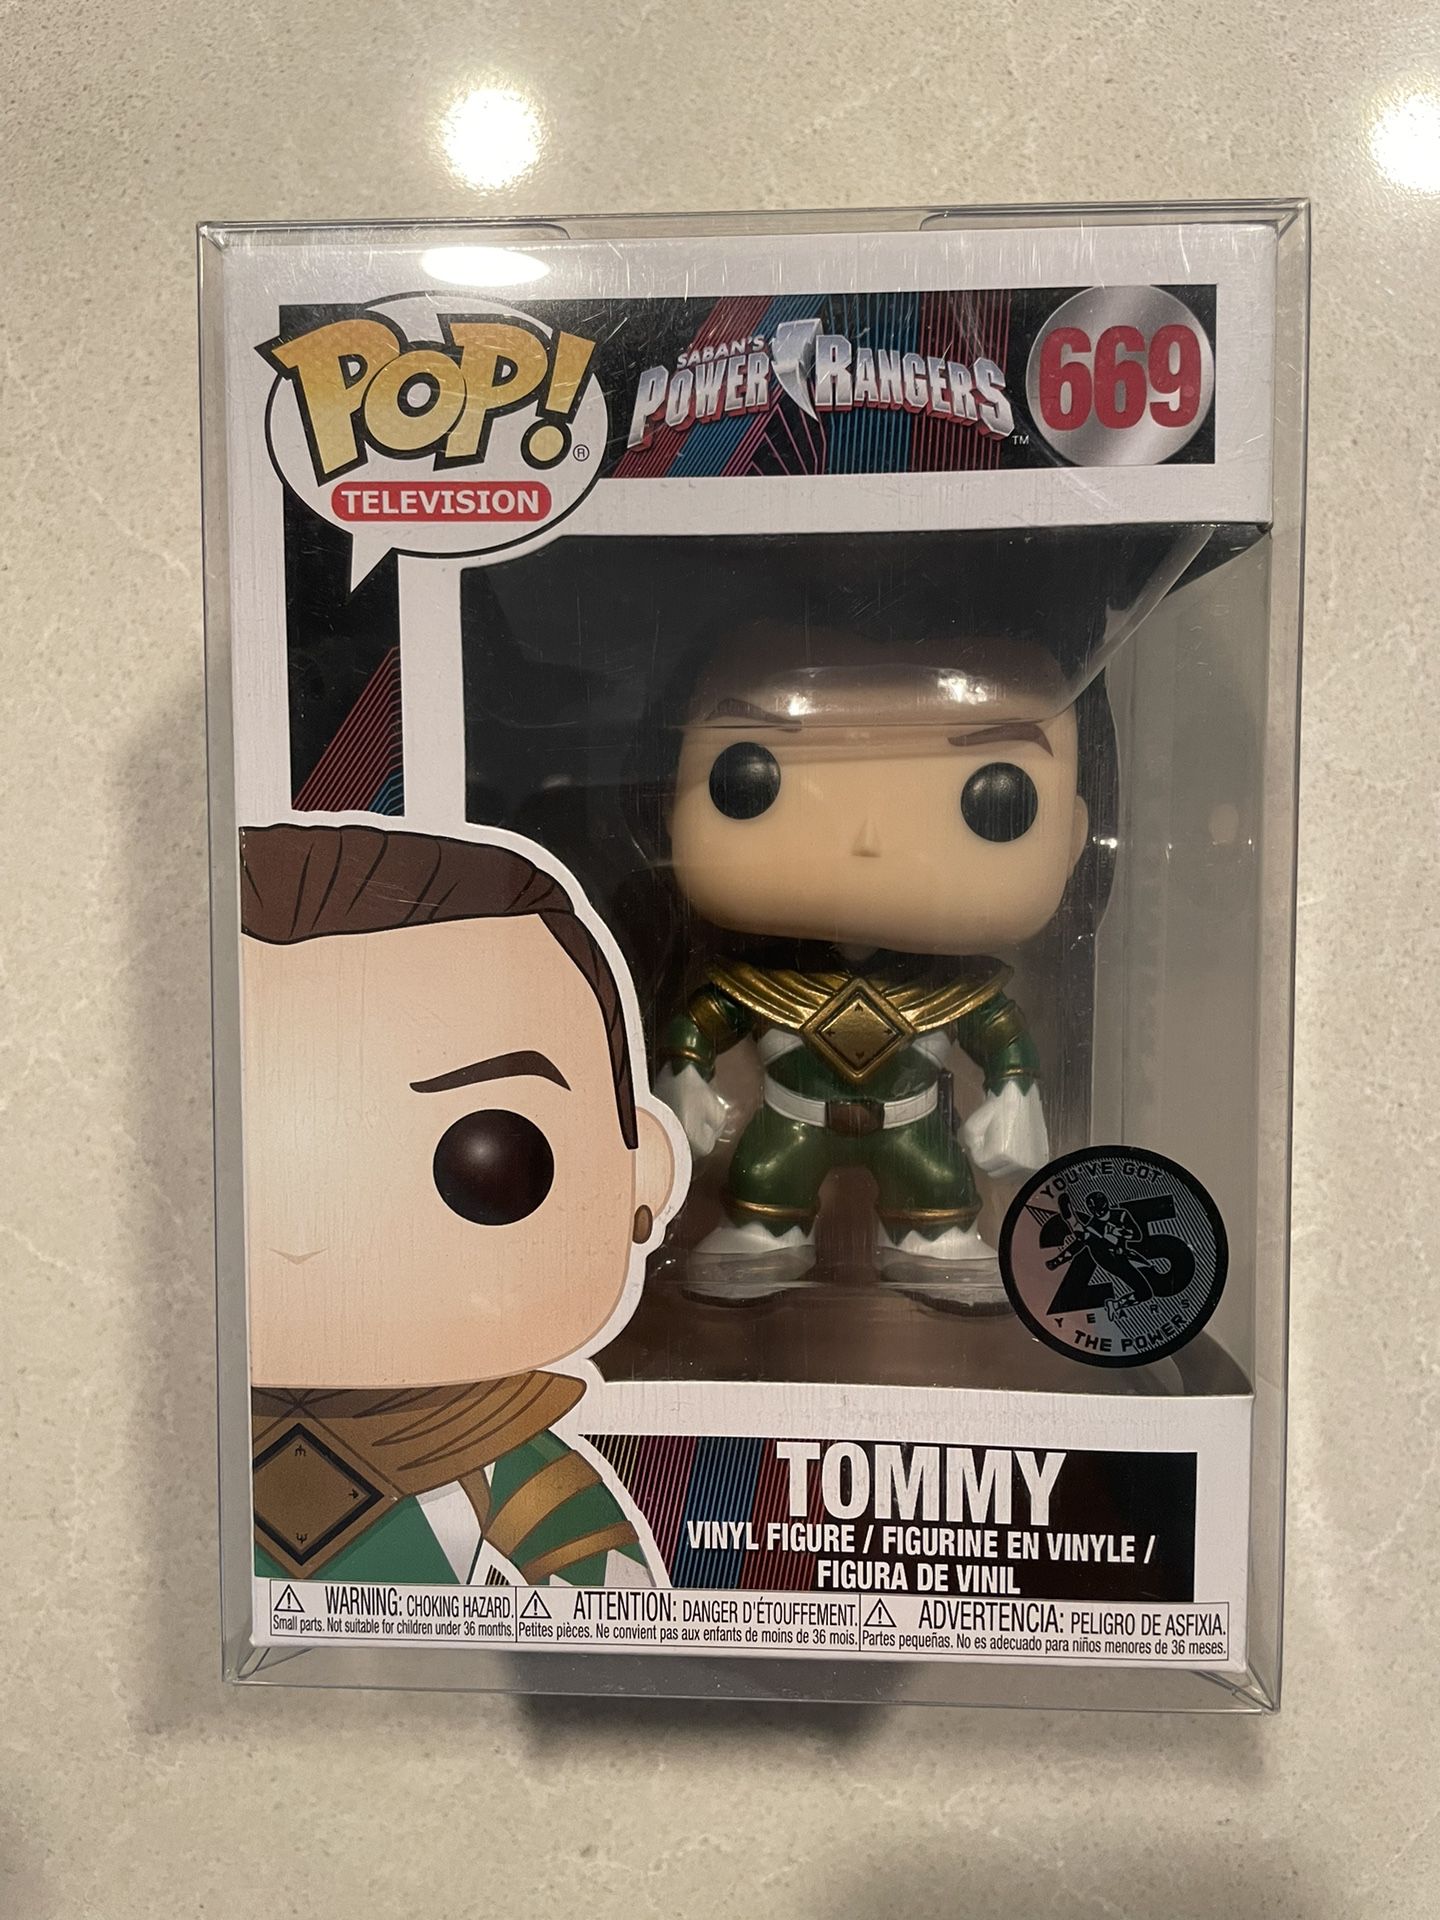 Metallic Green Ranger Tommy Funko Pop Galactic Toys Exclusive MMPR Mighty Morphin Power Rangers 669 with protector Unmasked Television